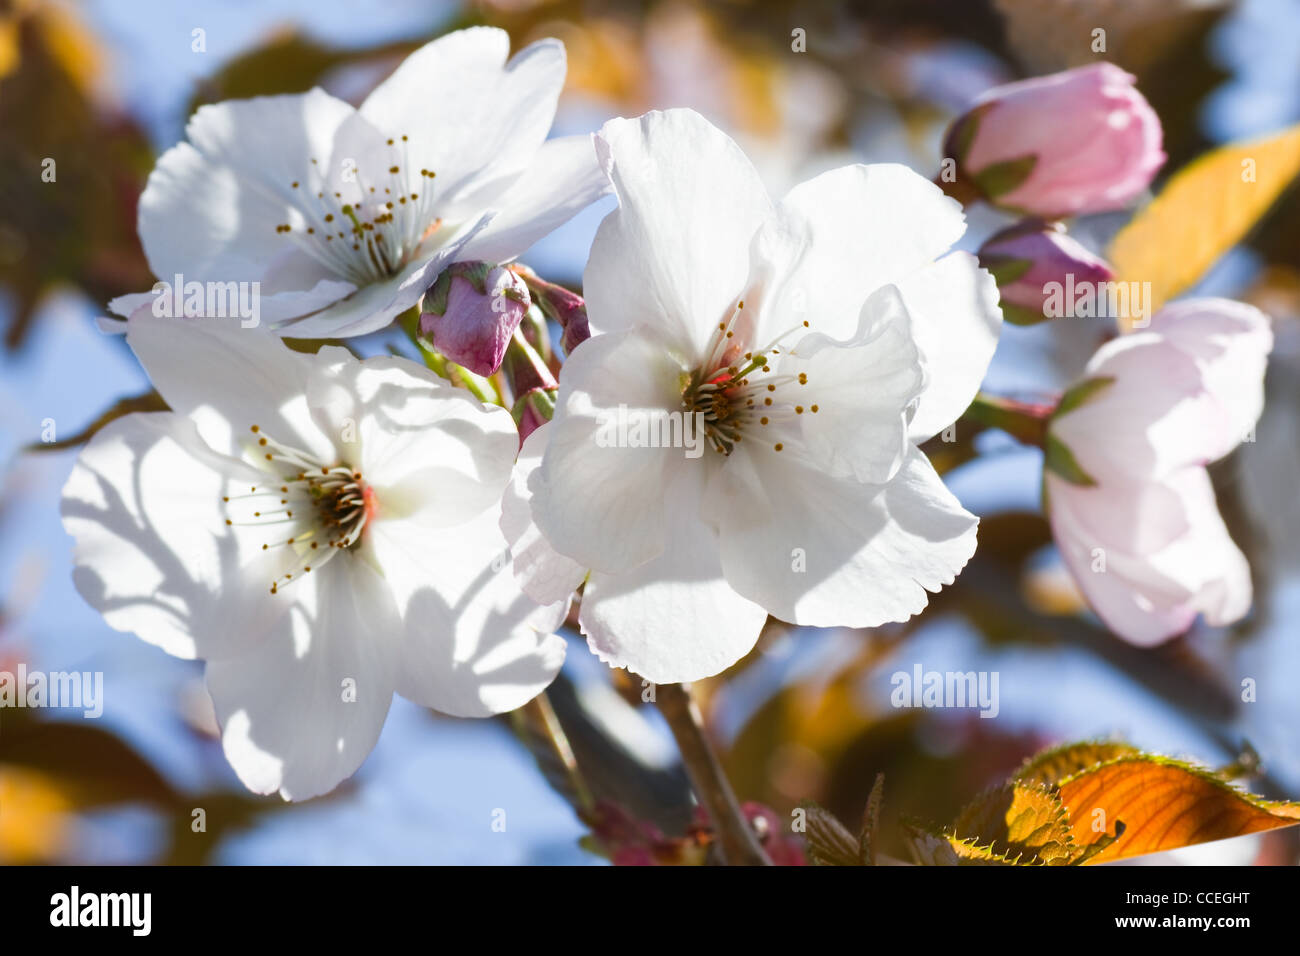 Cherry blossom in spring with bronze colors of new leaves and blue sky in background Stock Photo